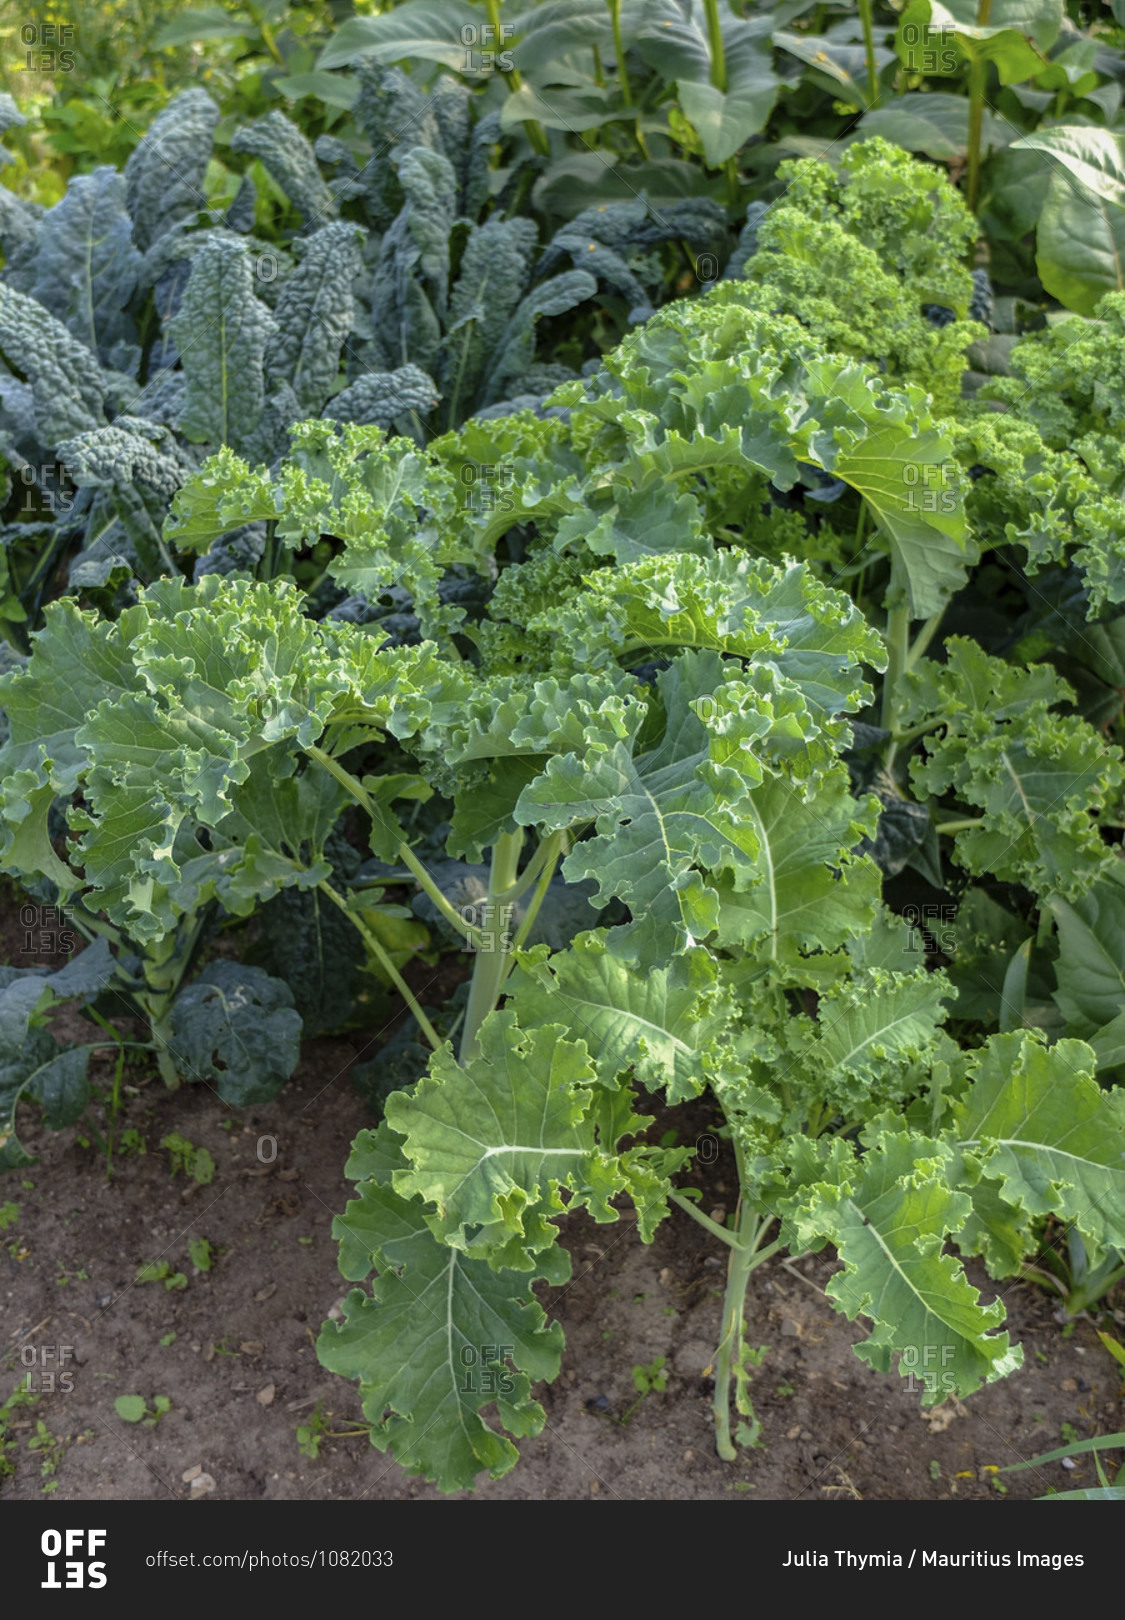 Kale (Brassica oleracea var. Sabellica) with palm cabbage in the vegetable patch